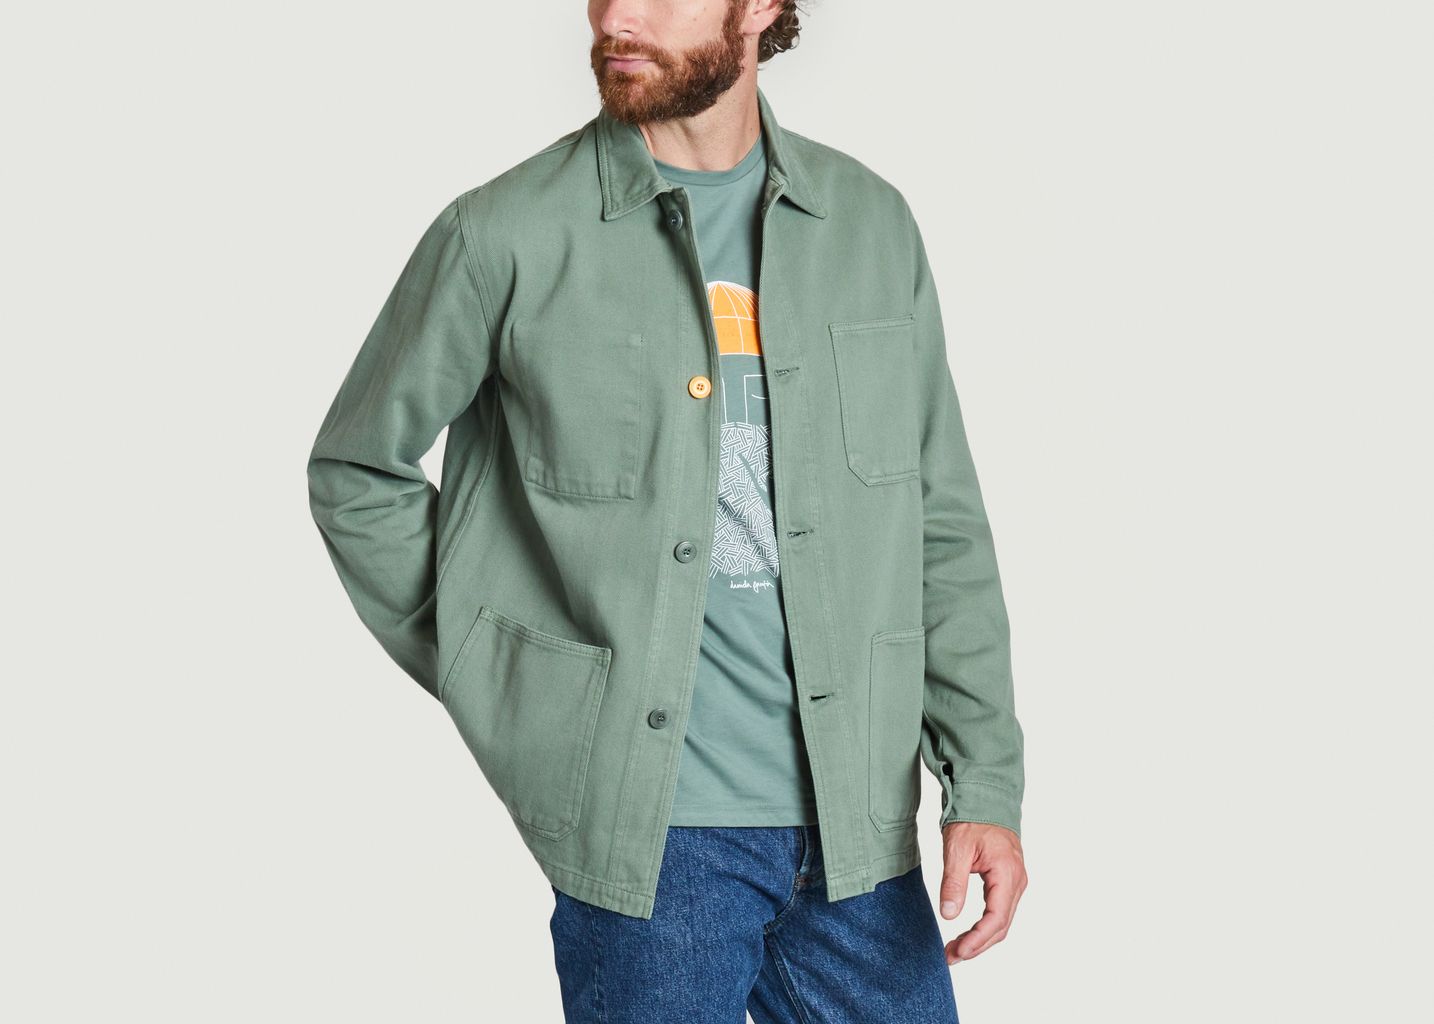 Sergi jacket, Spinach - Bask in the Sun